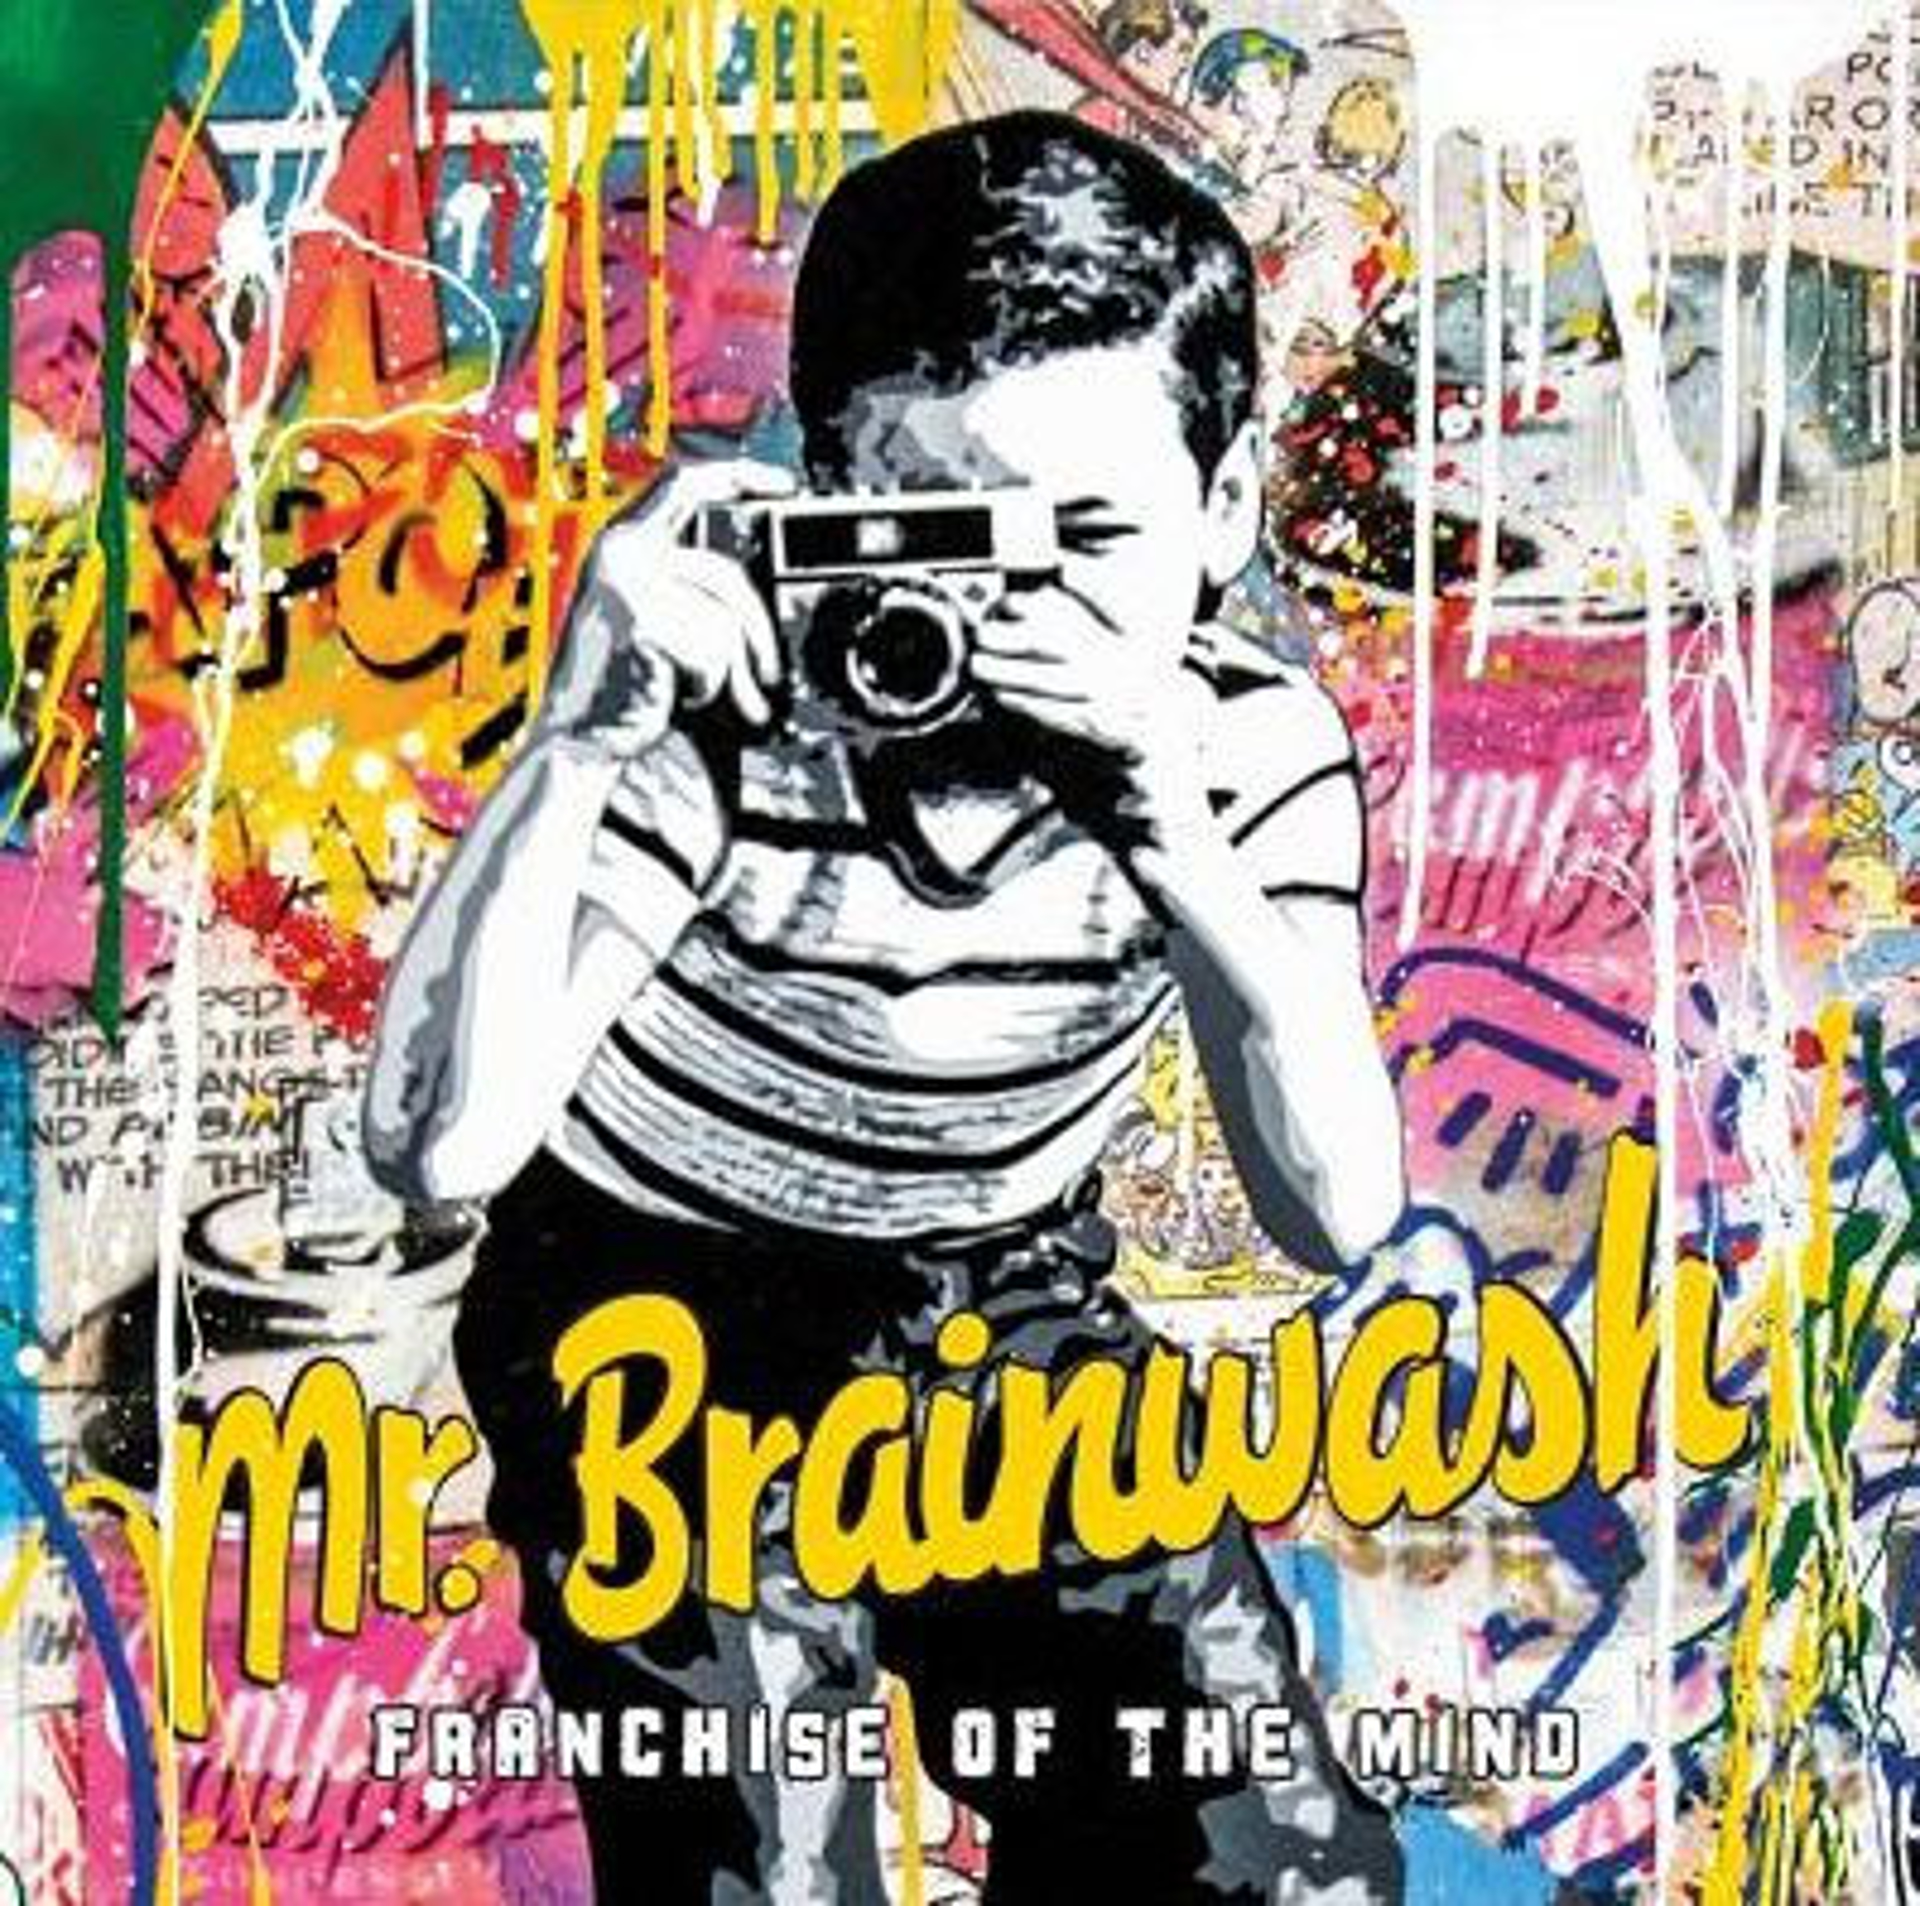 Franchise of the mind by Mr. Brainwash (b. 1966)